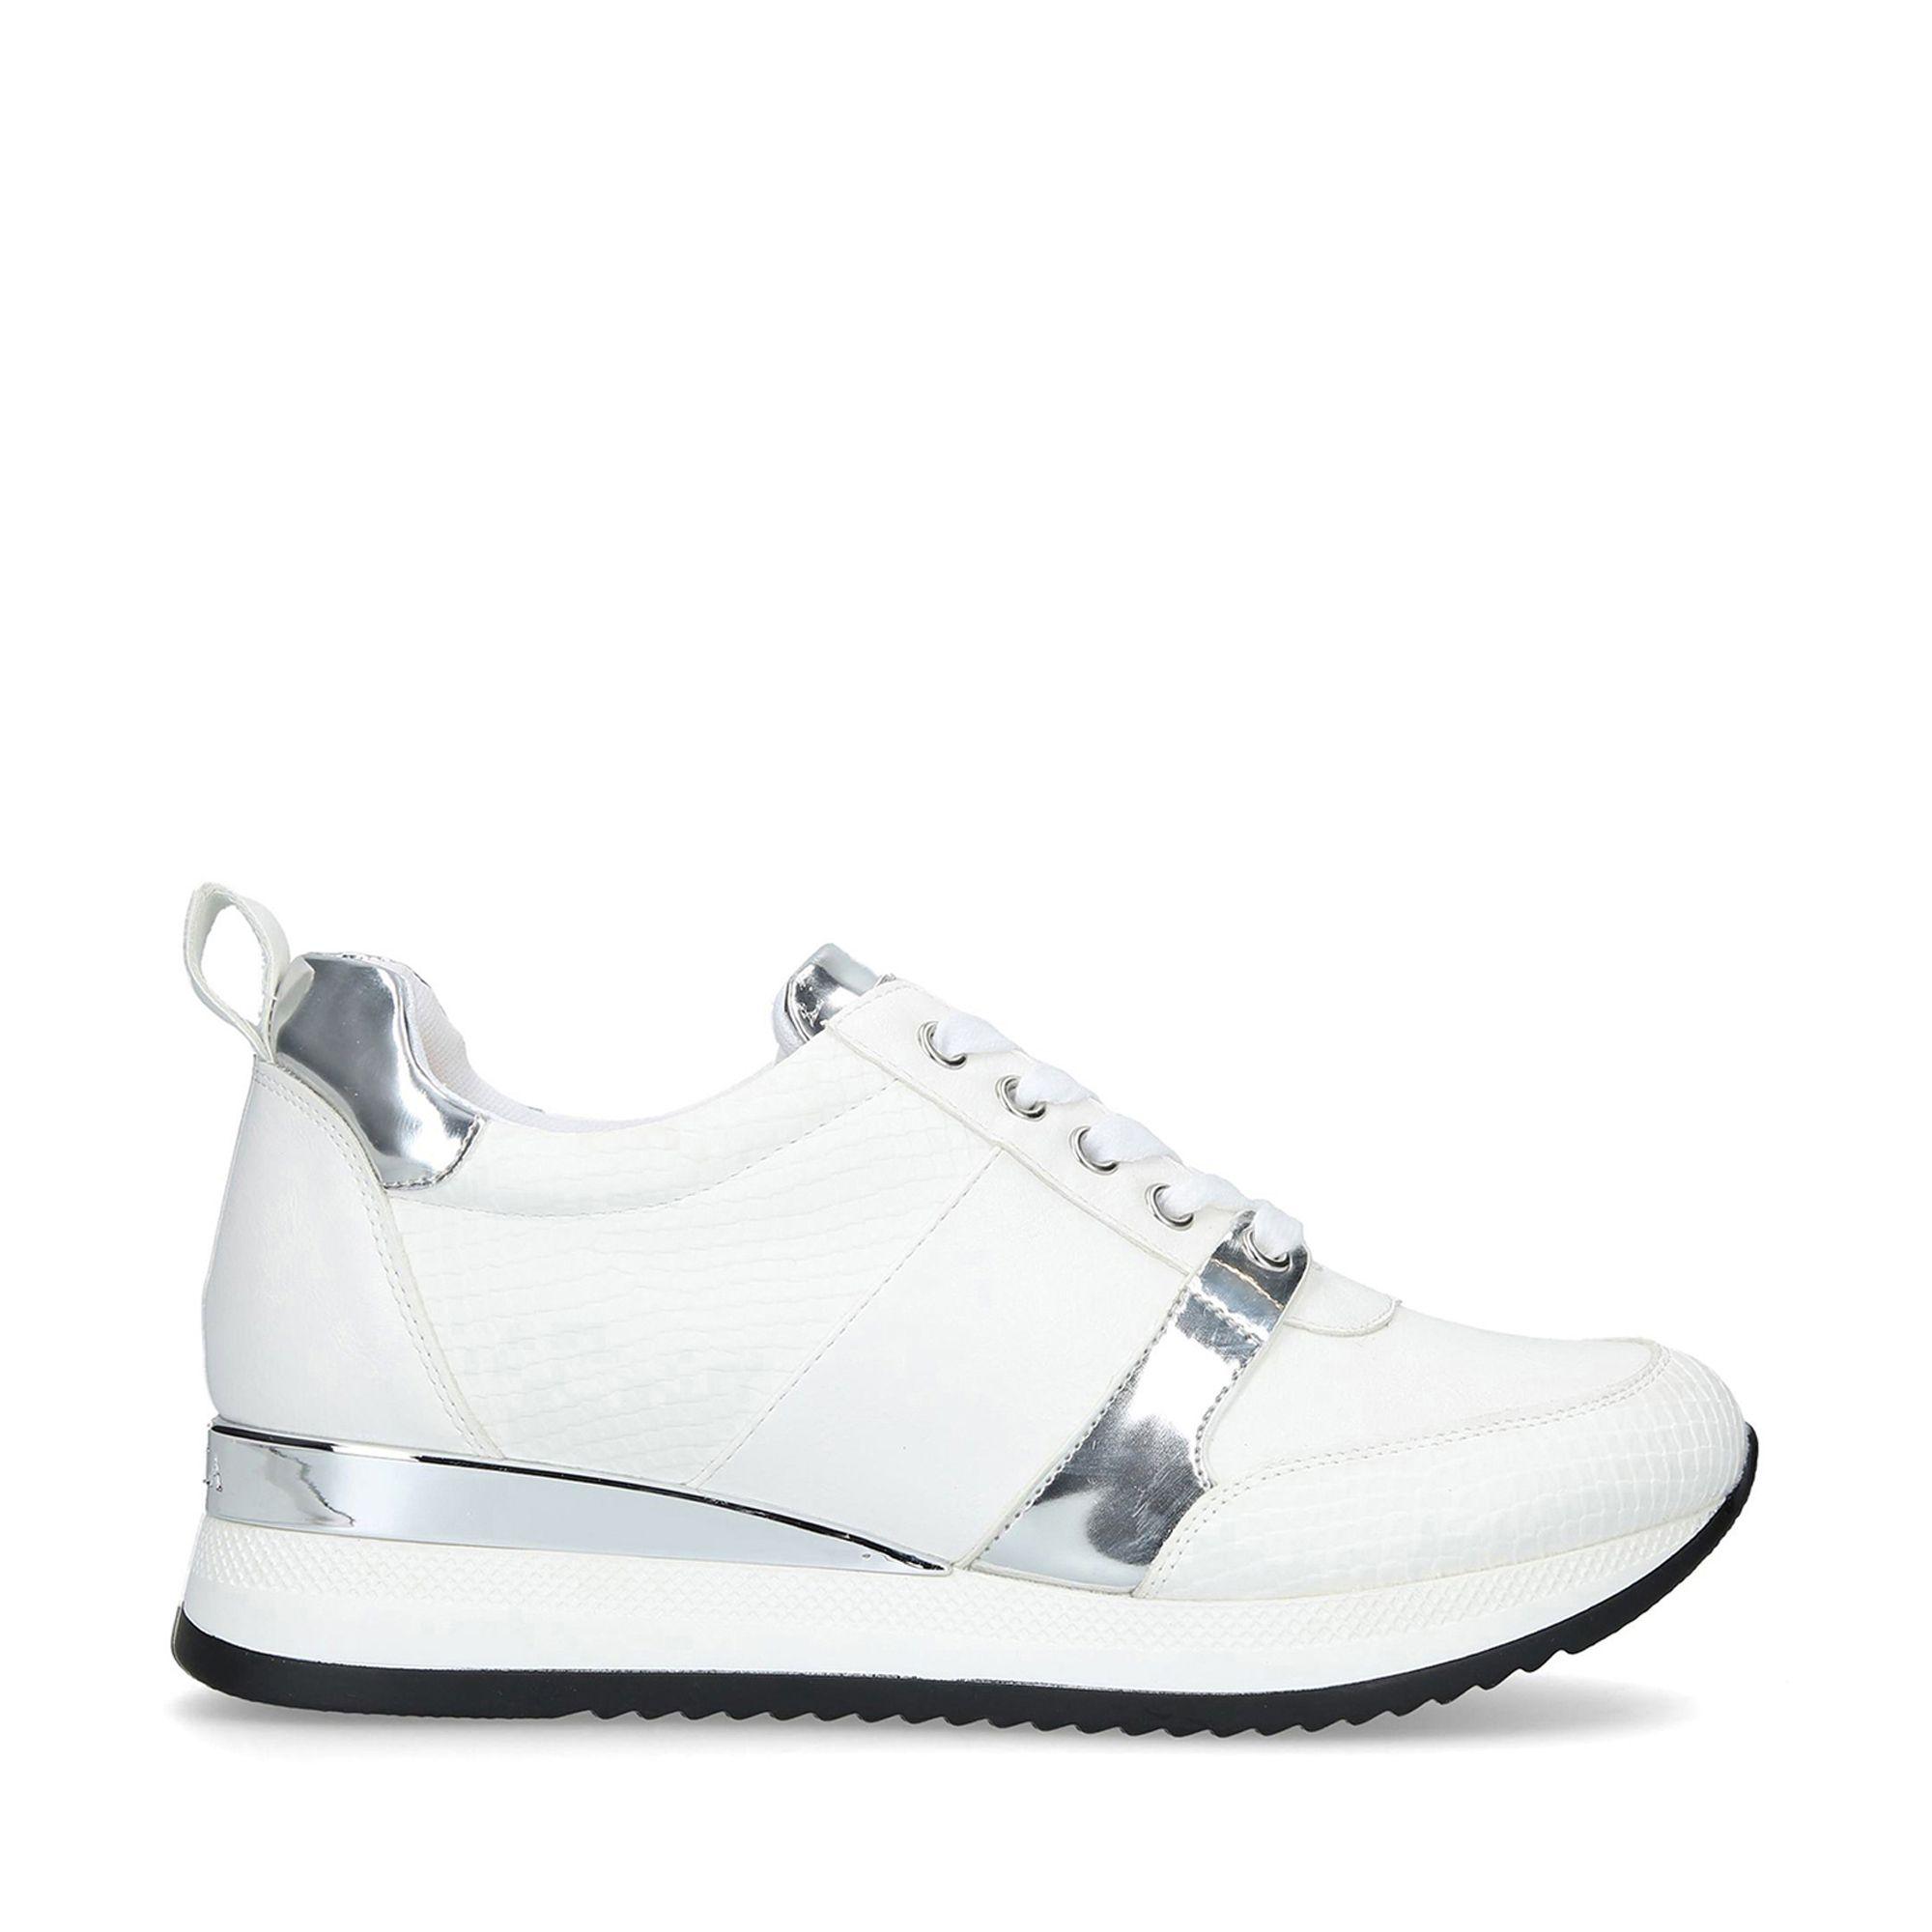 Carvela Kurt Geiger Leather Justified in White - Lyst